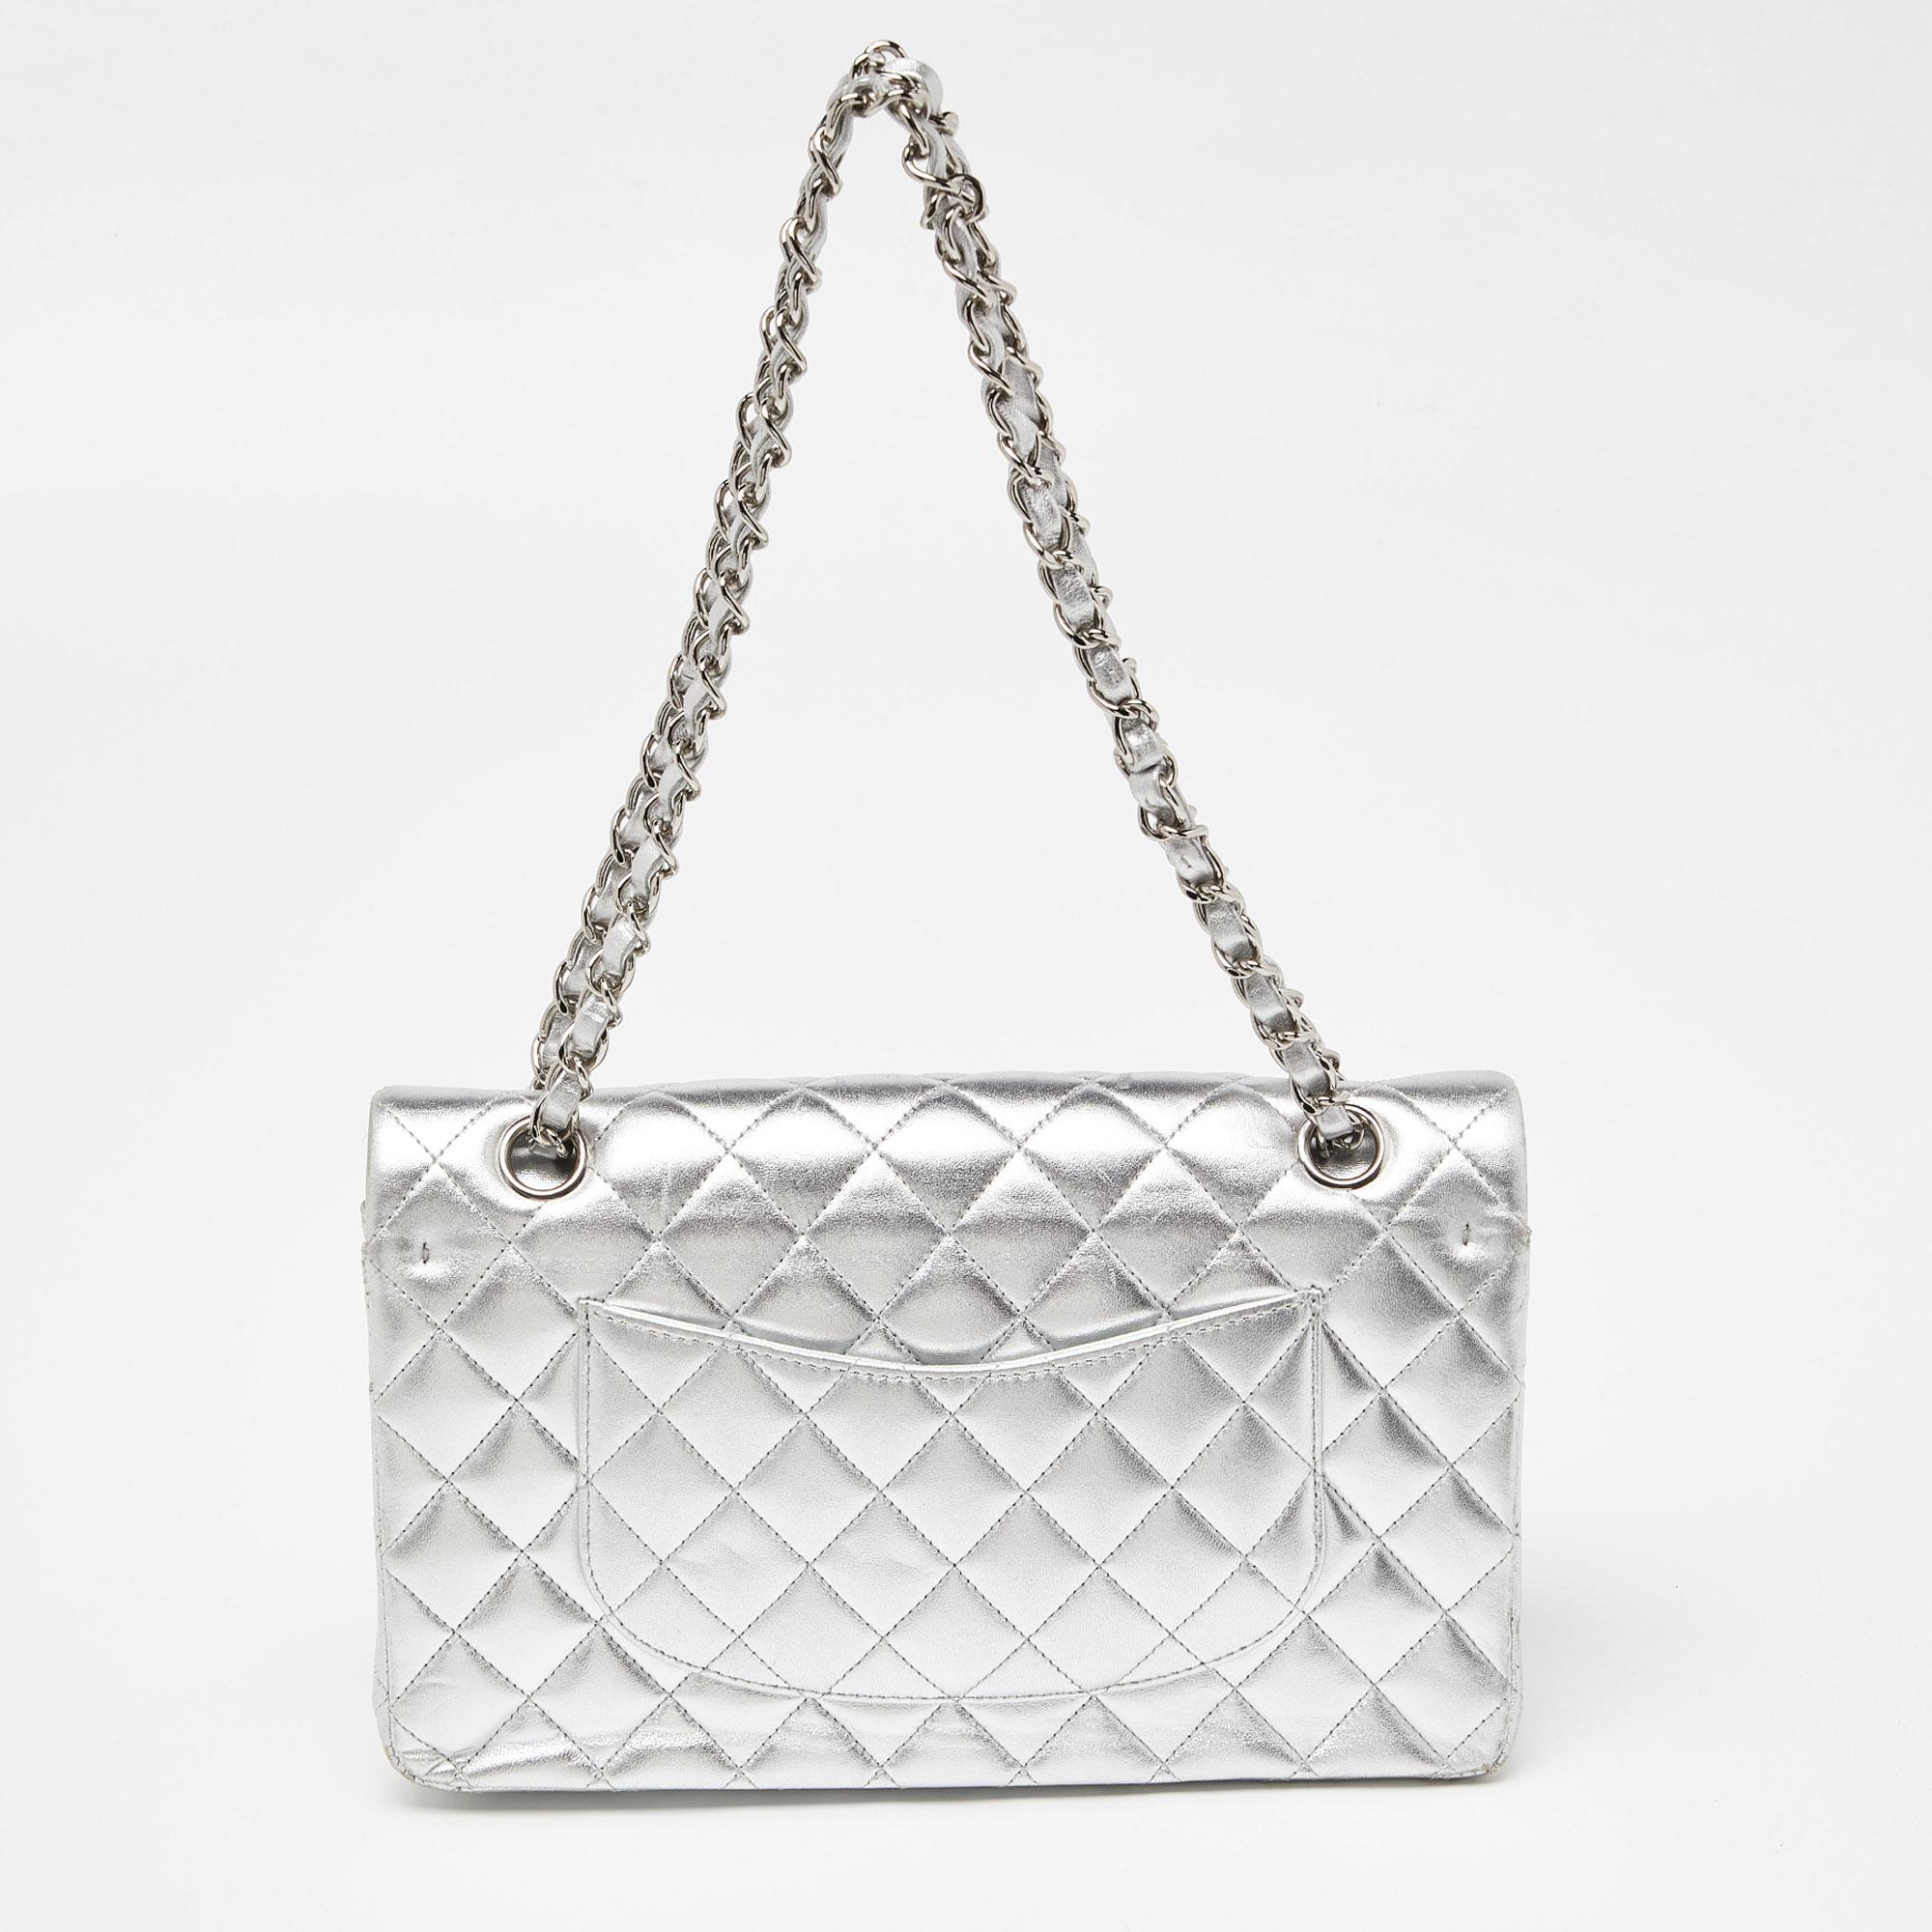 Chanel Silver Quilted Leather Medium Classic Double Flap Bag 6